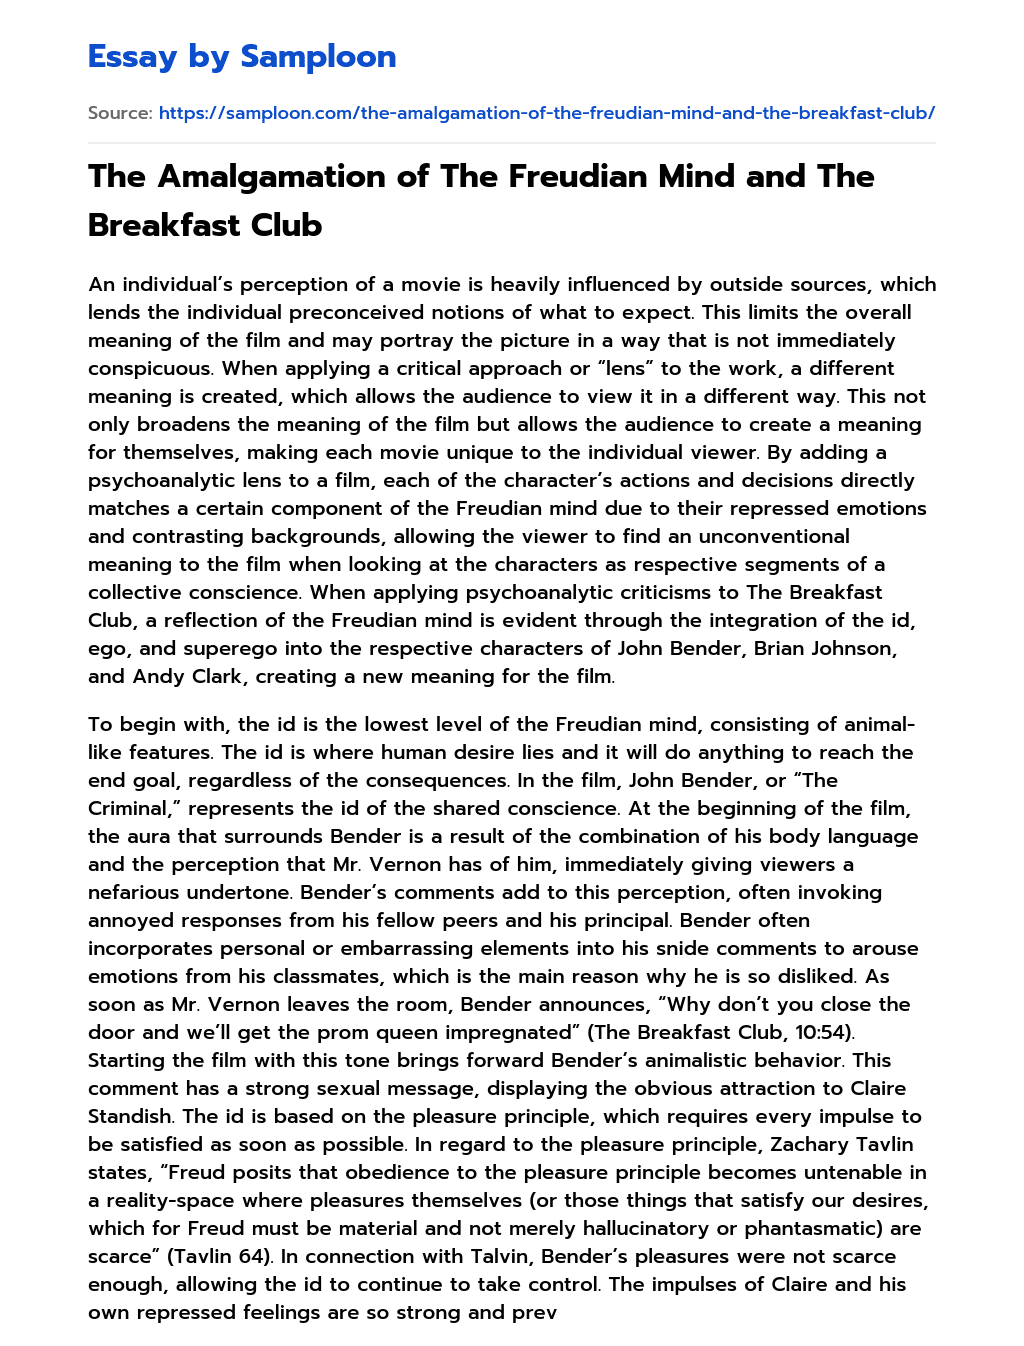 The Amalgamation of The Freudian Mind and The Breakfast Club essay